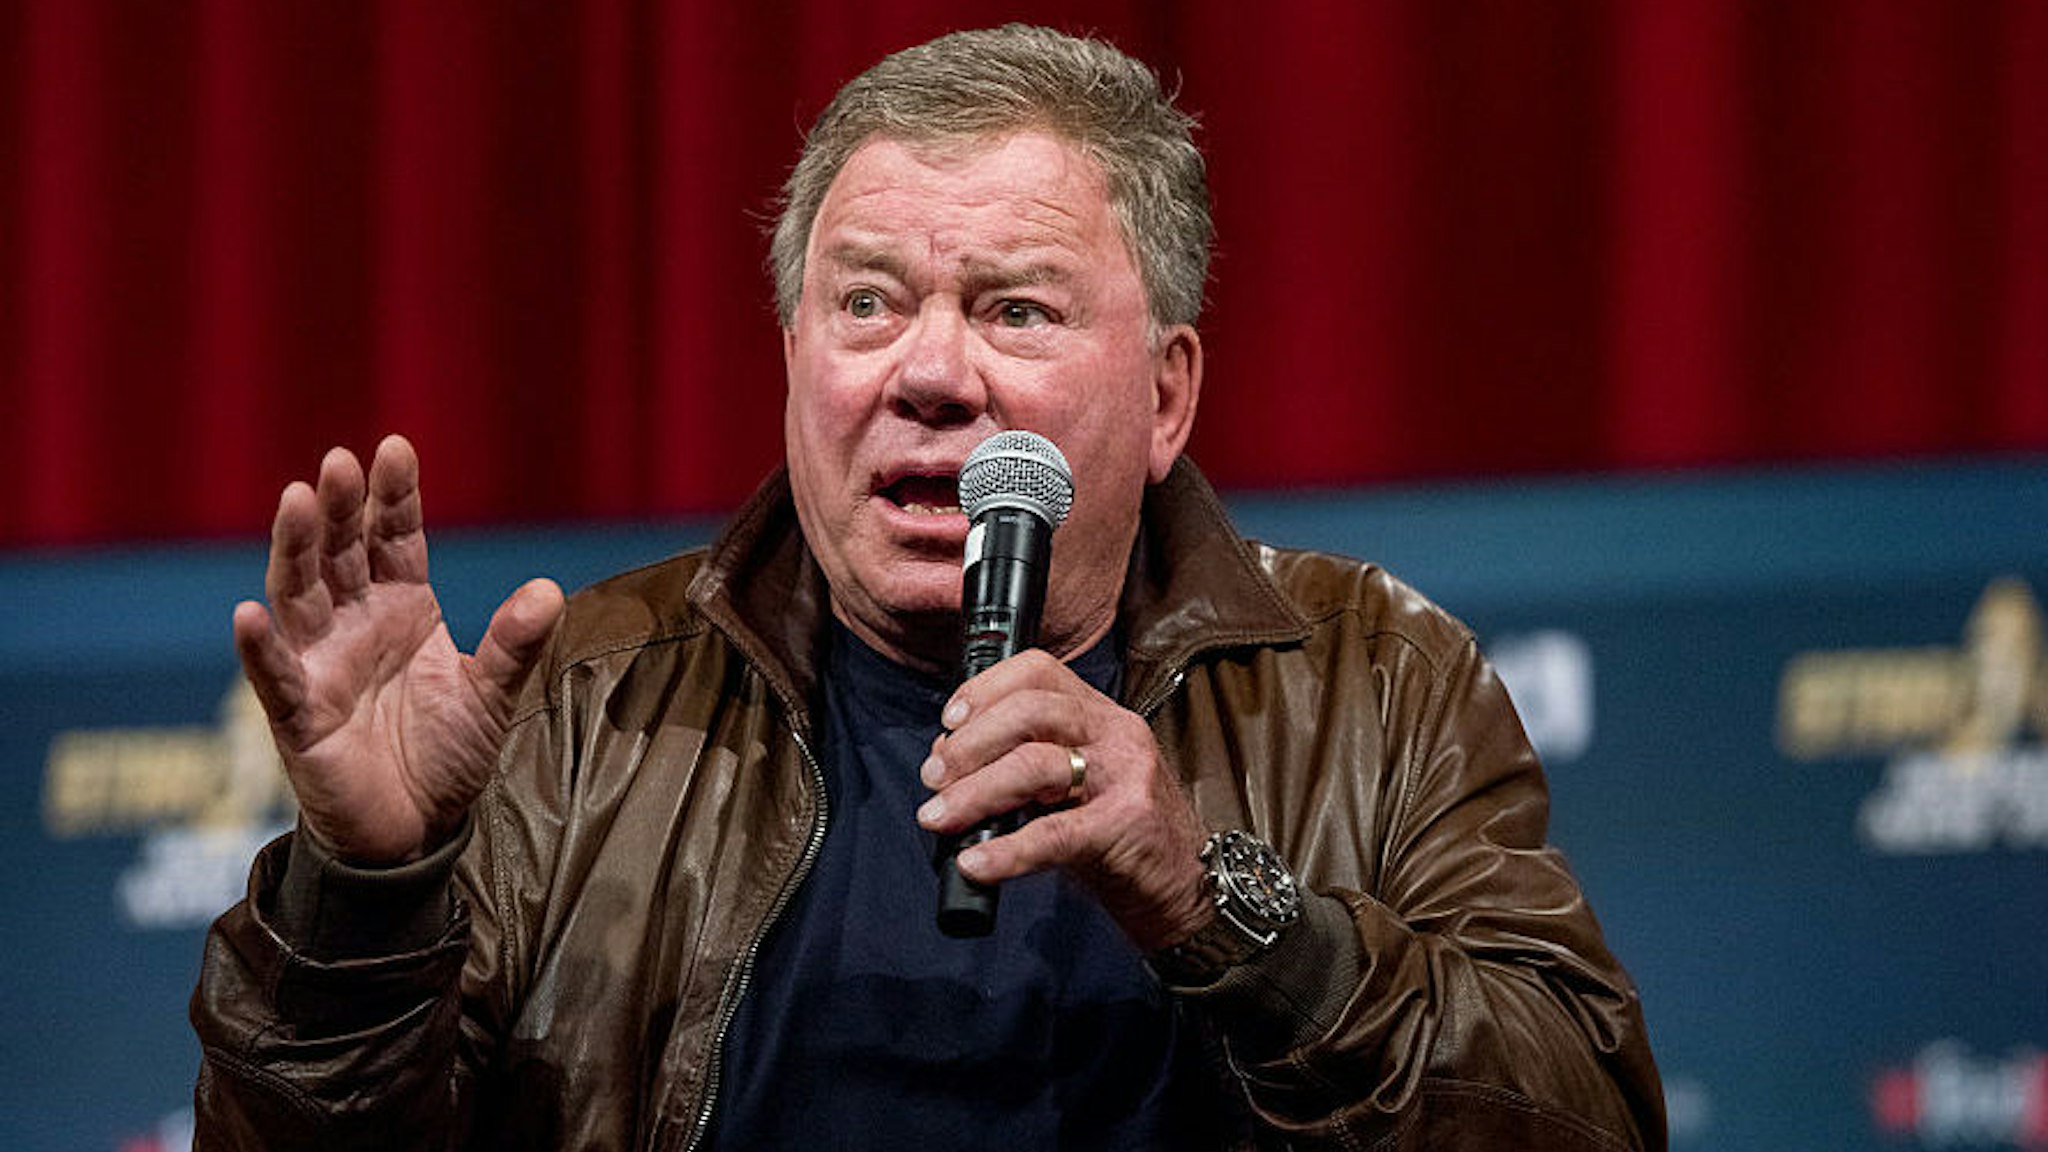 NEW YORK, NY - SEPTEMBER 04: Actor William Shatner on the main stage during "Star Trek: Mission New York" day 3 at Javits Center on September 4, 2016 in New York City.